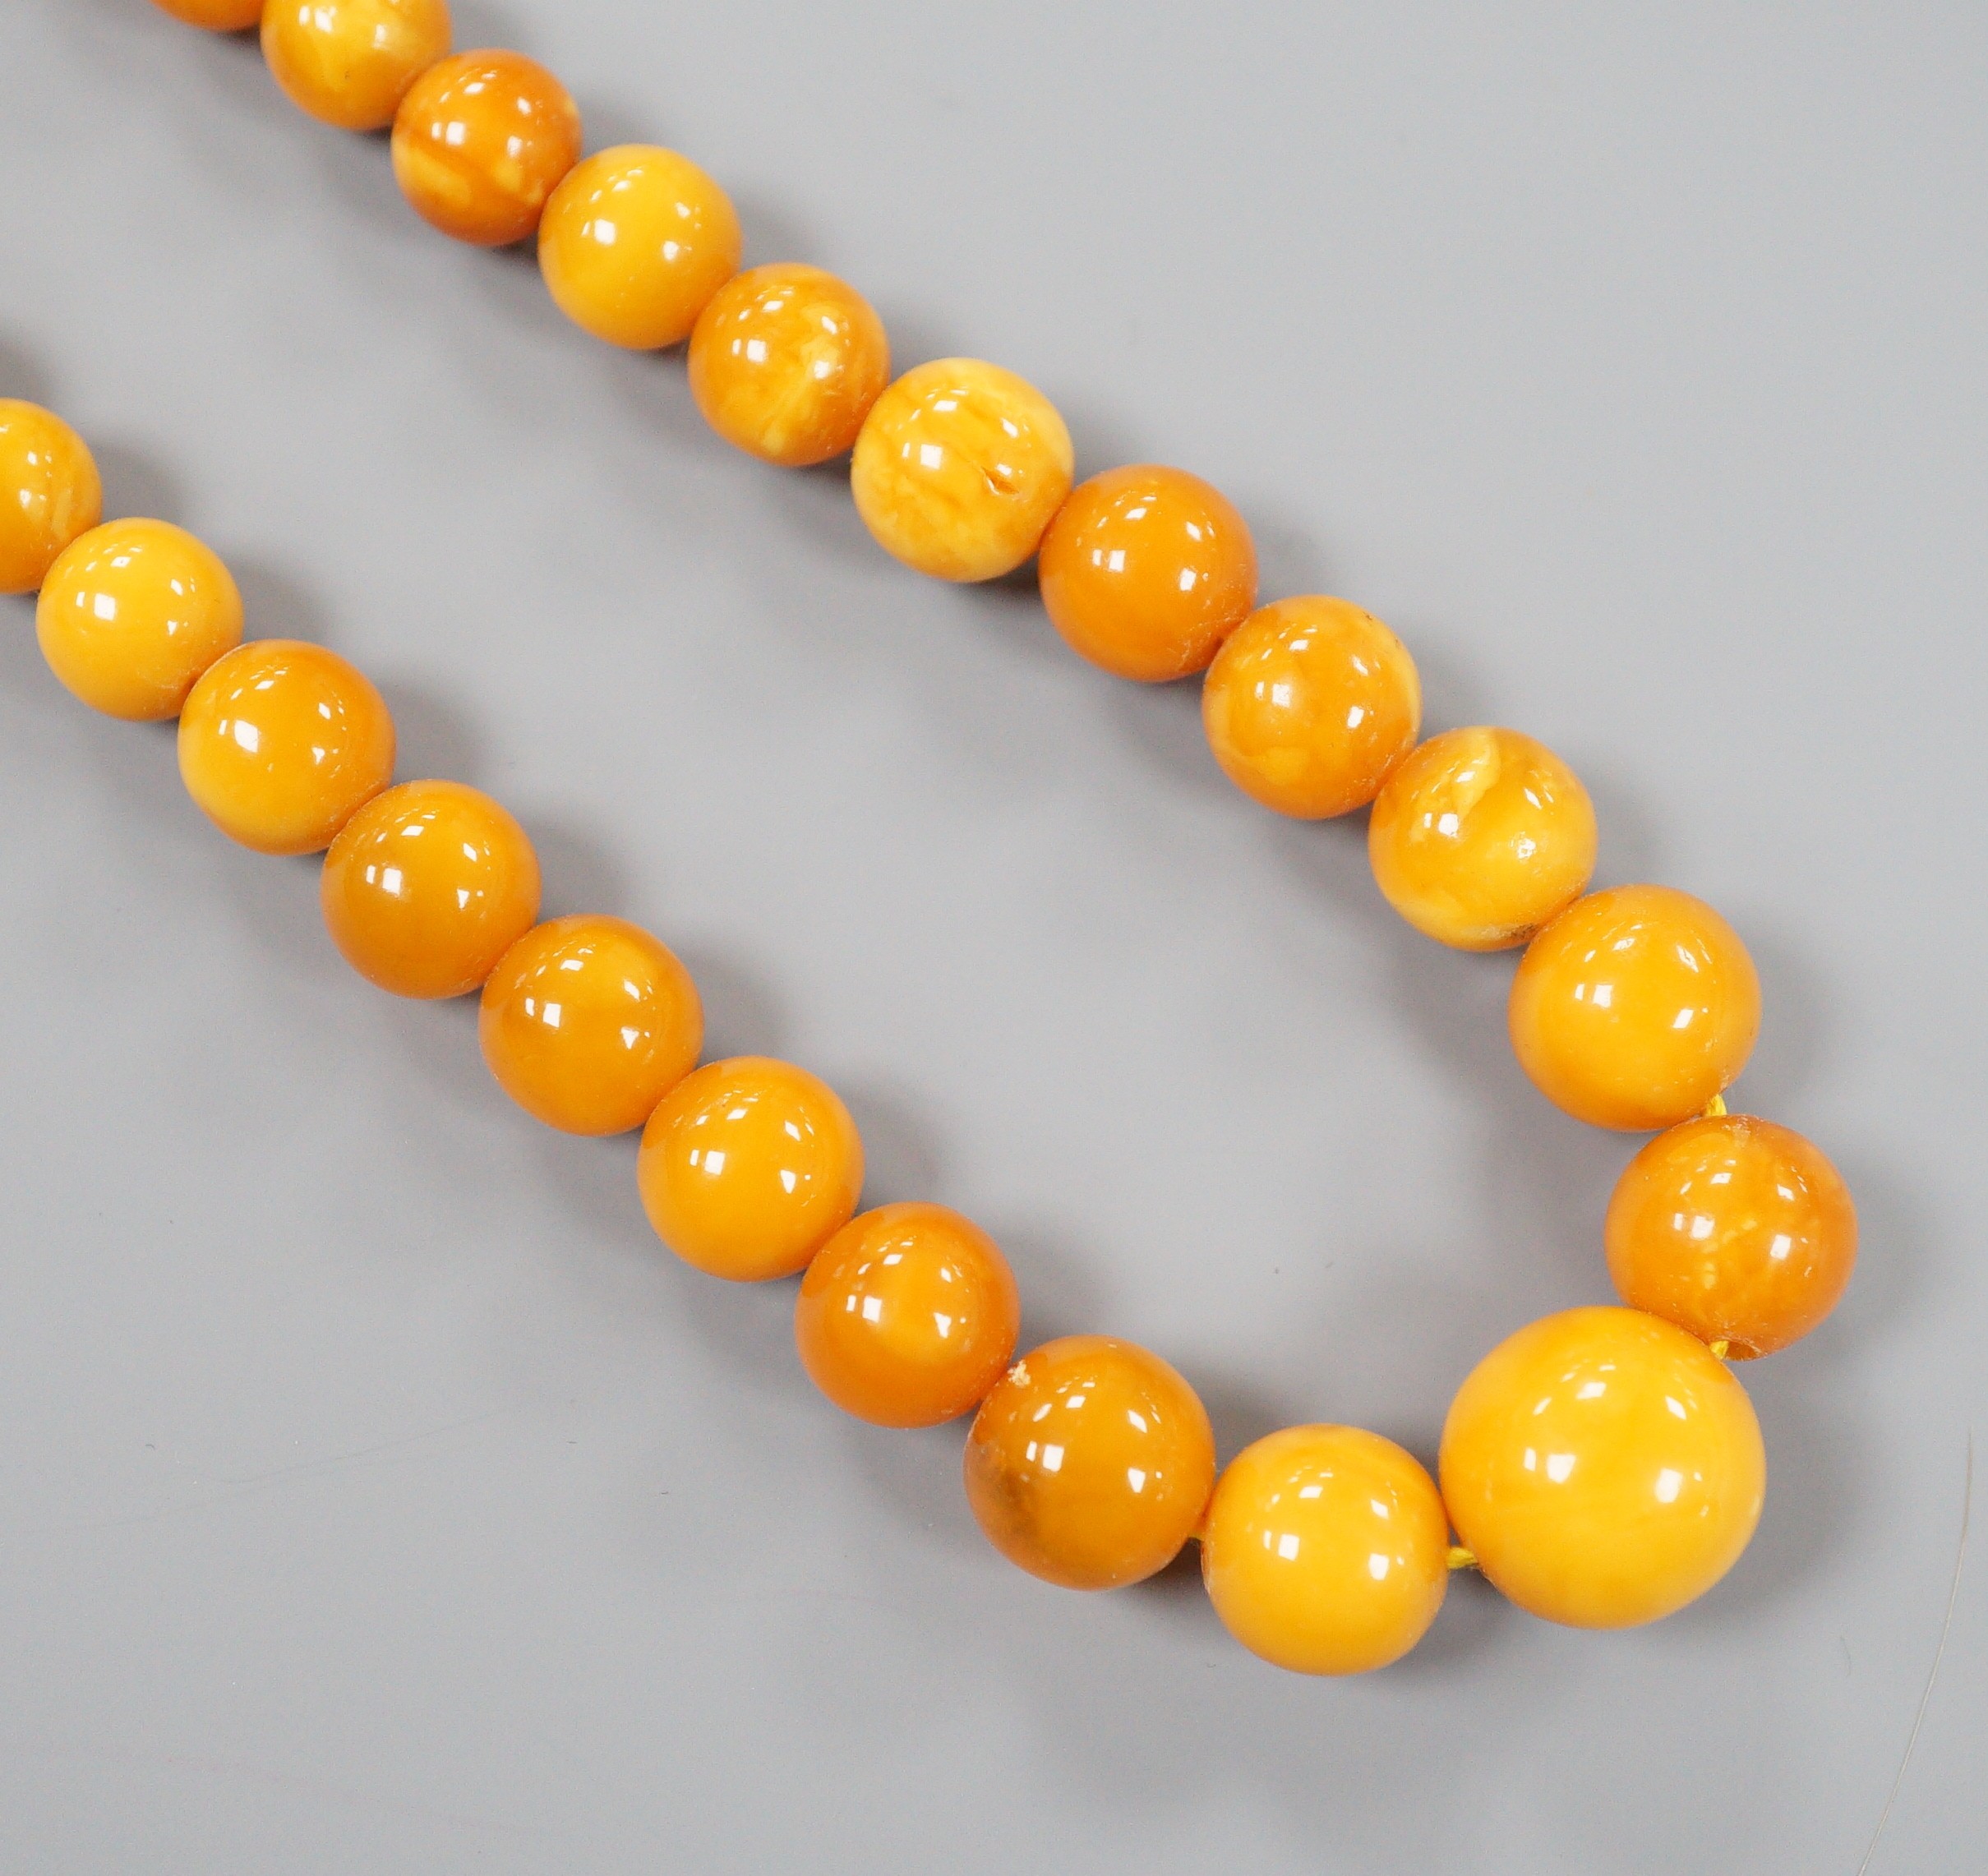 A singe strand graduated circular amber bead necklace, 42cm, gross weight 16 grams.